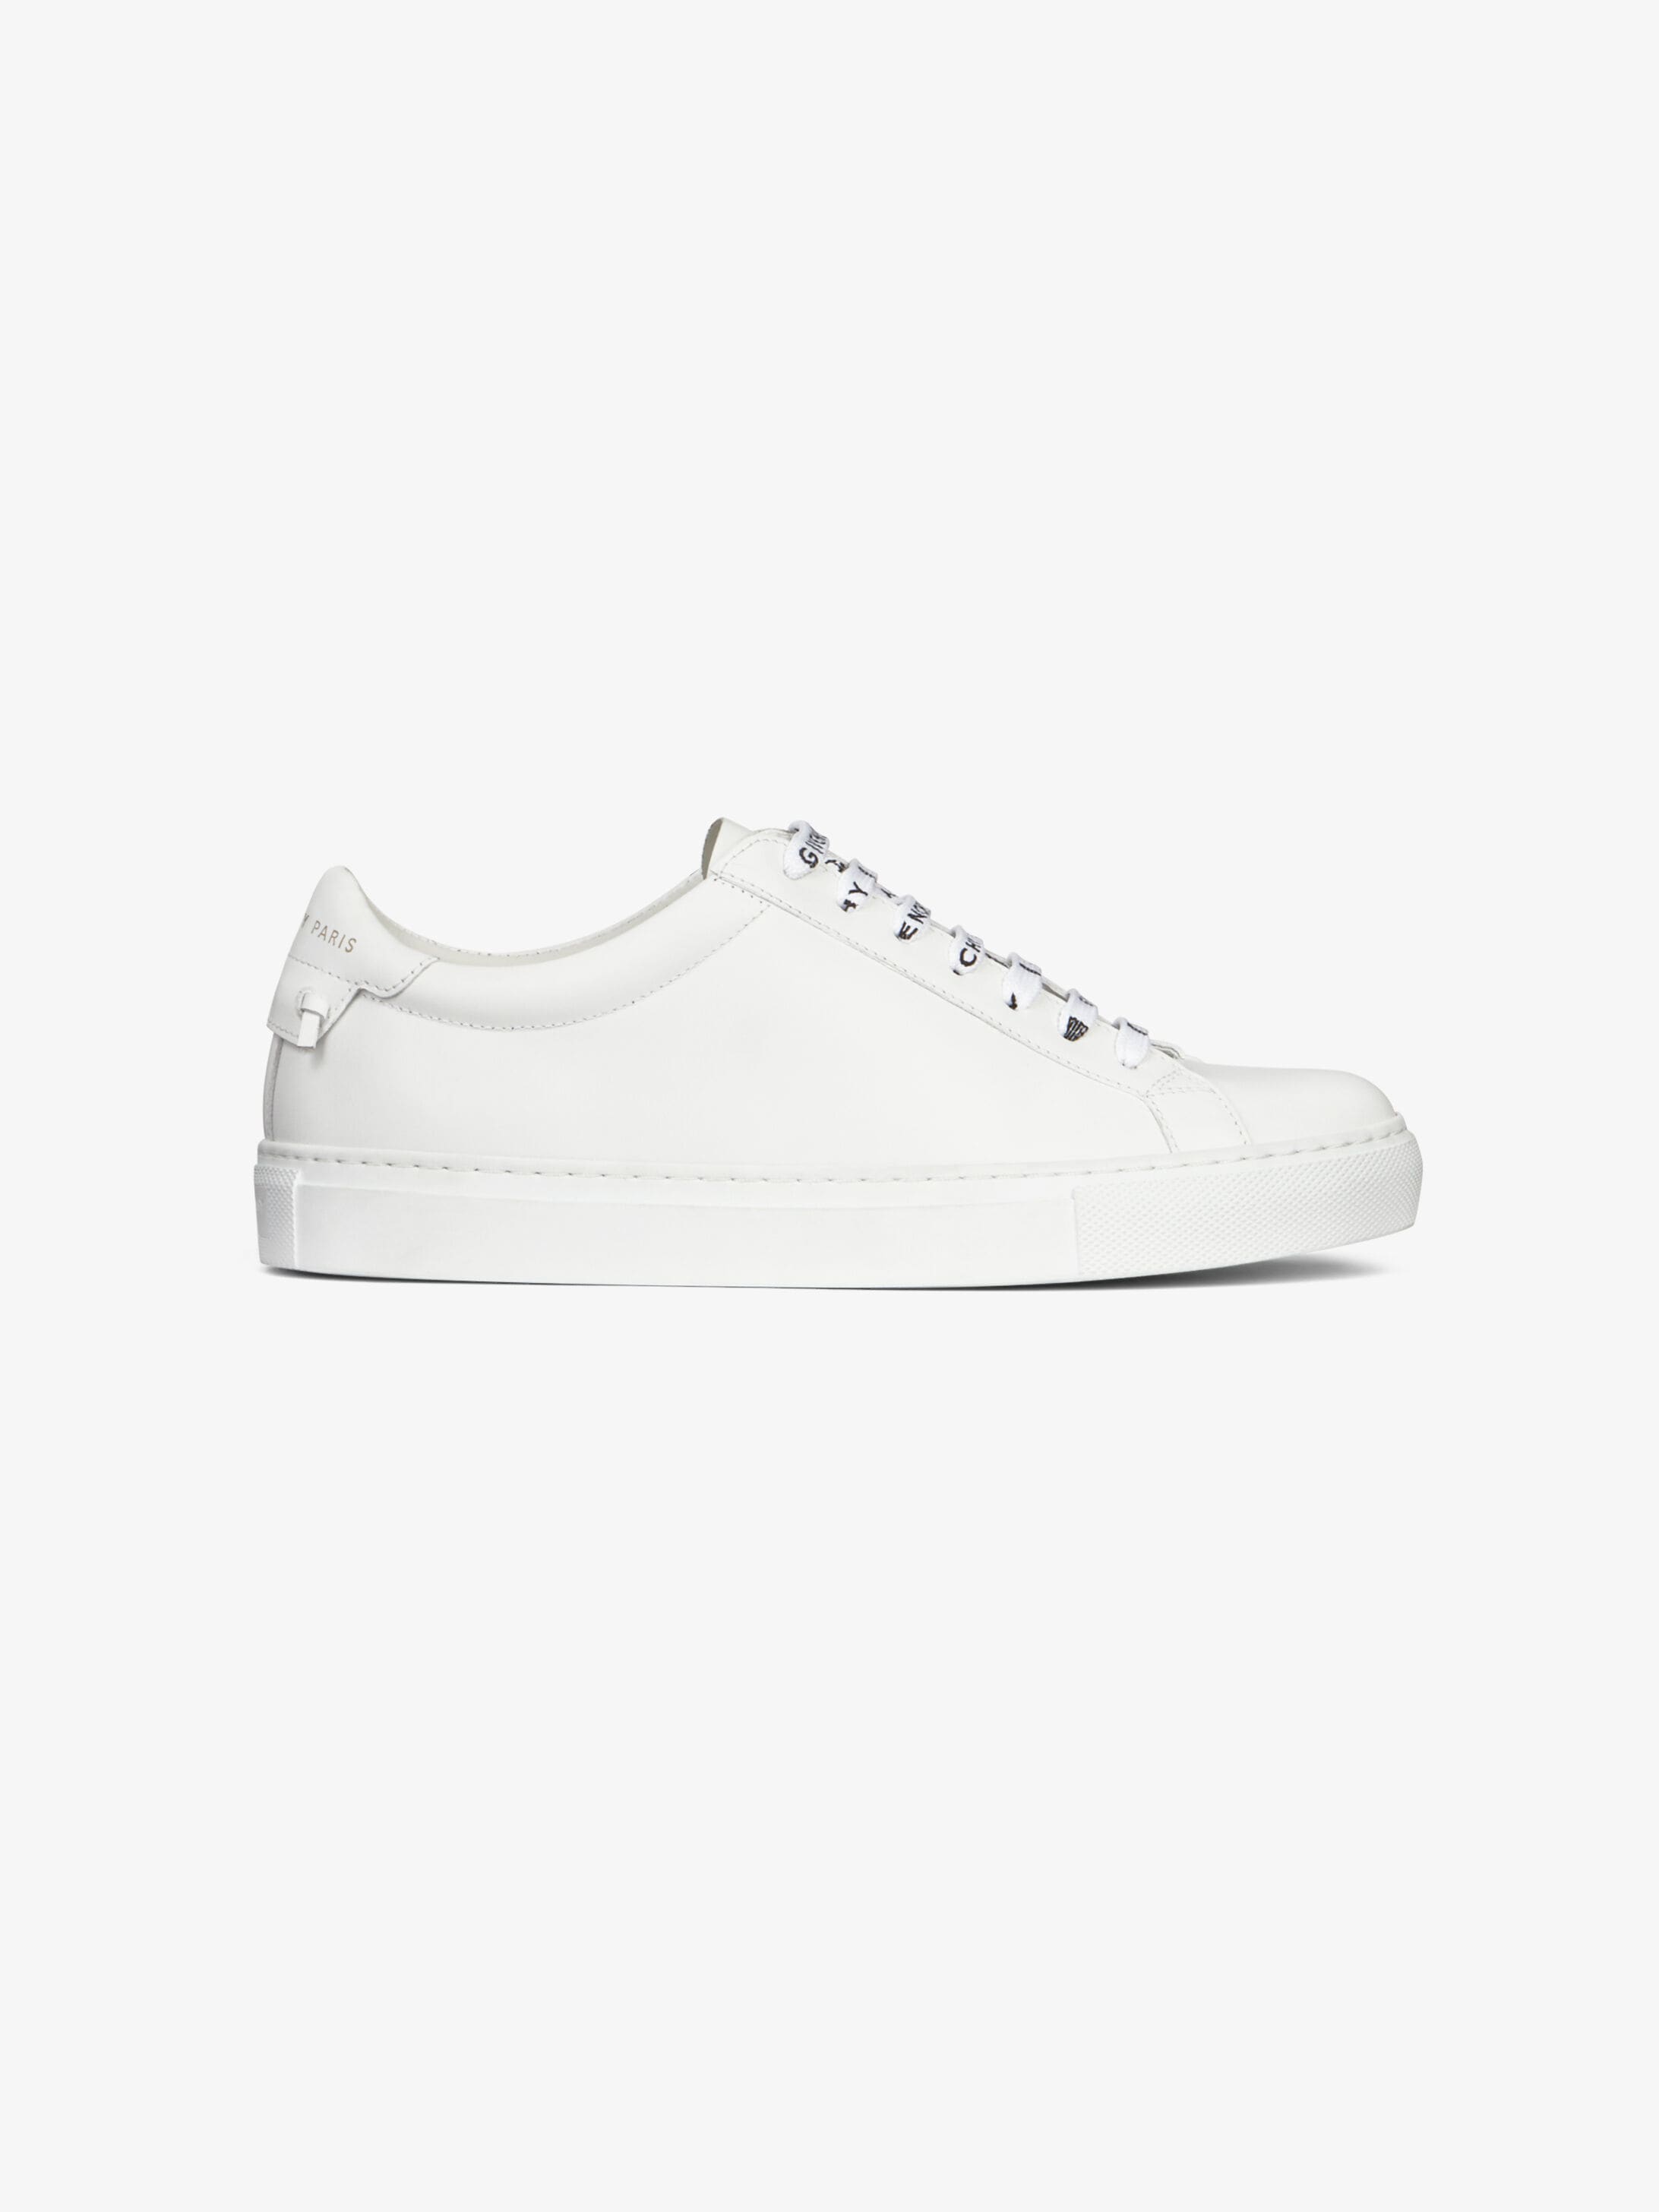 GIVENCHY 4G shoelace sneakers in 